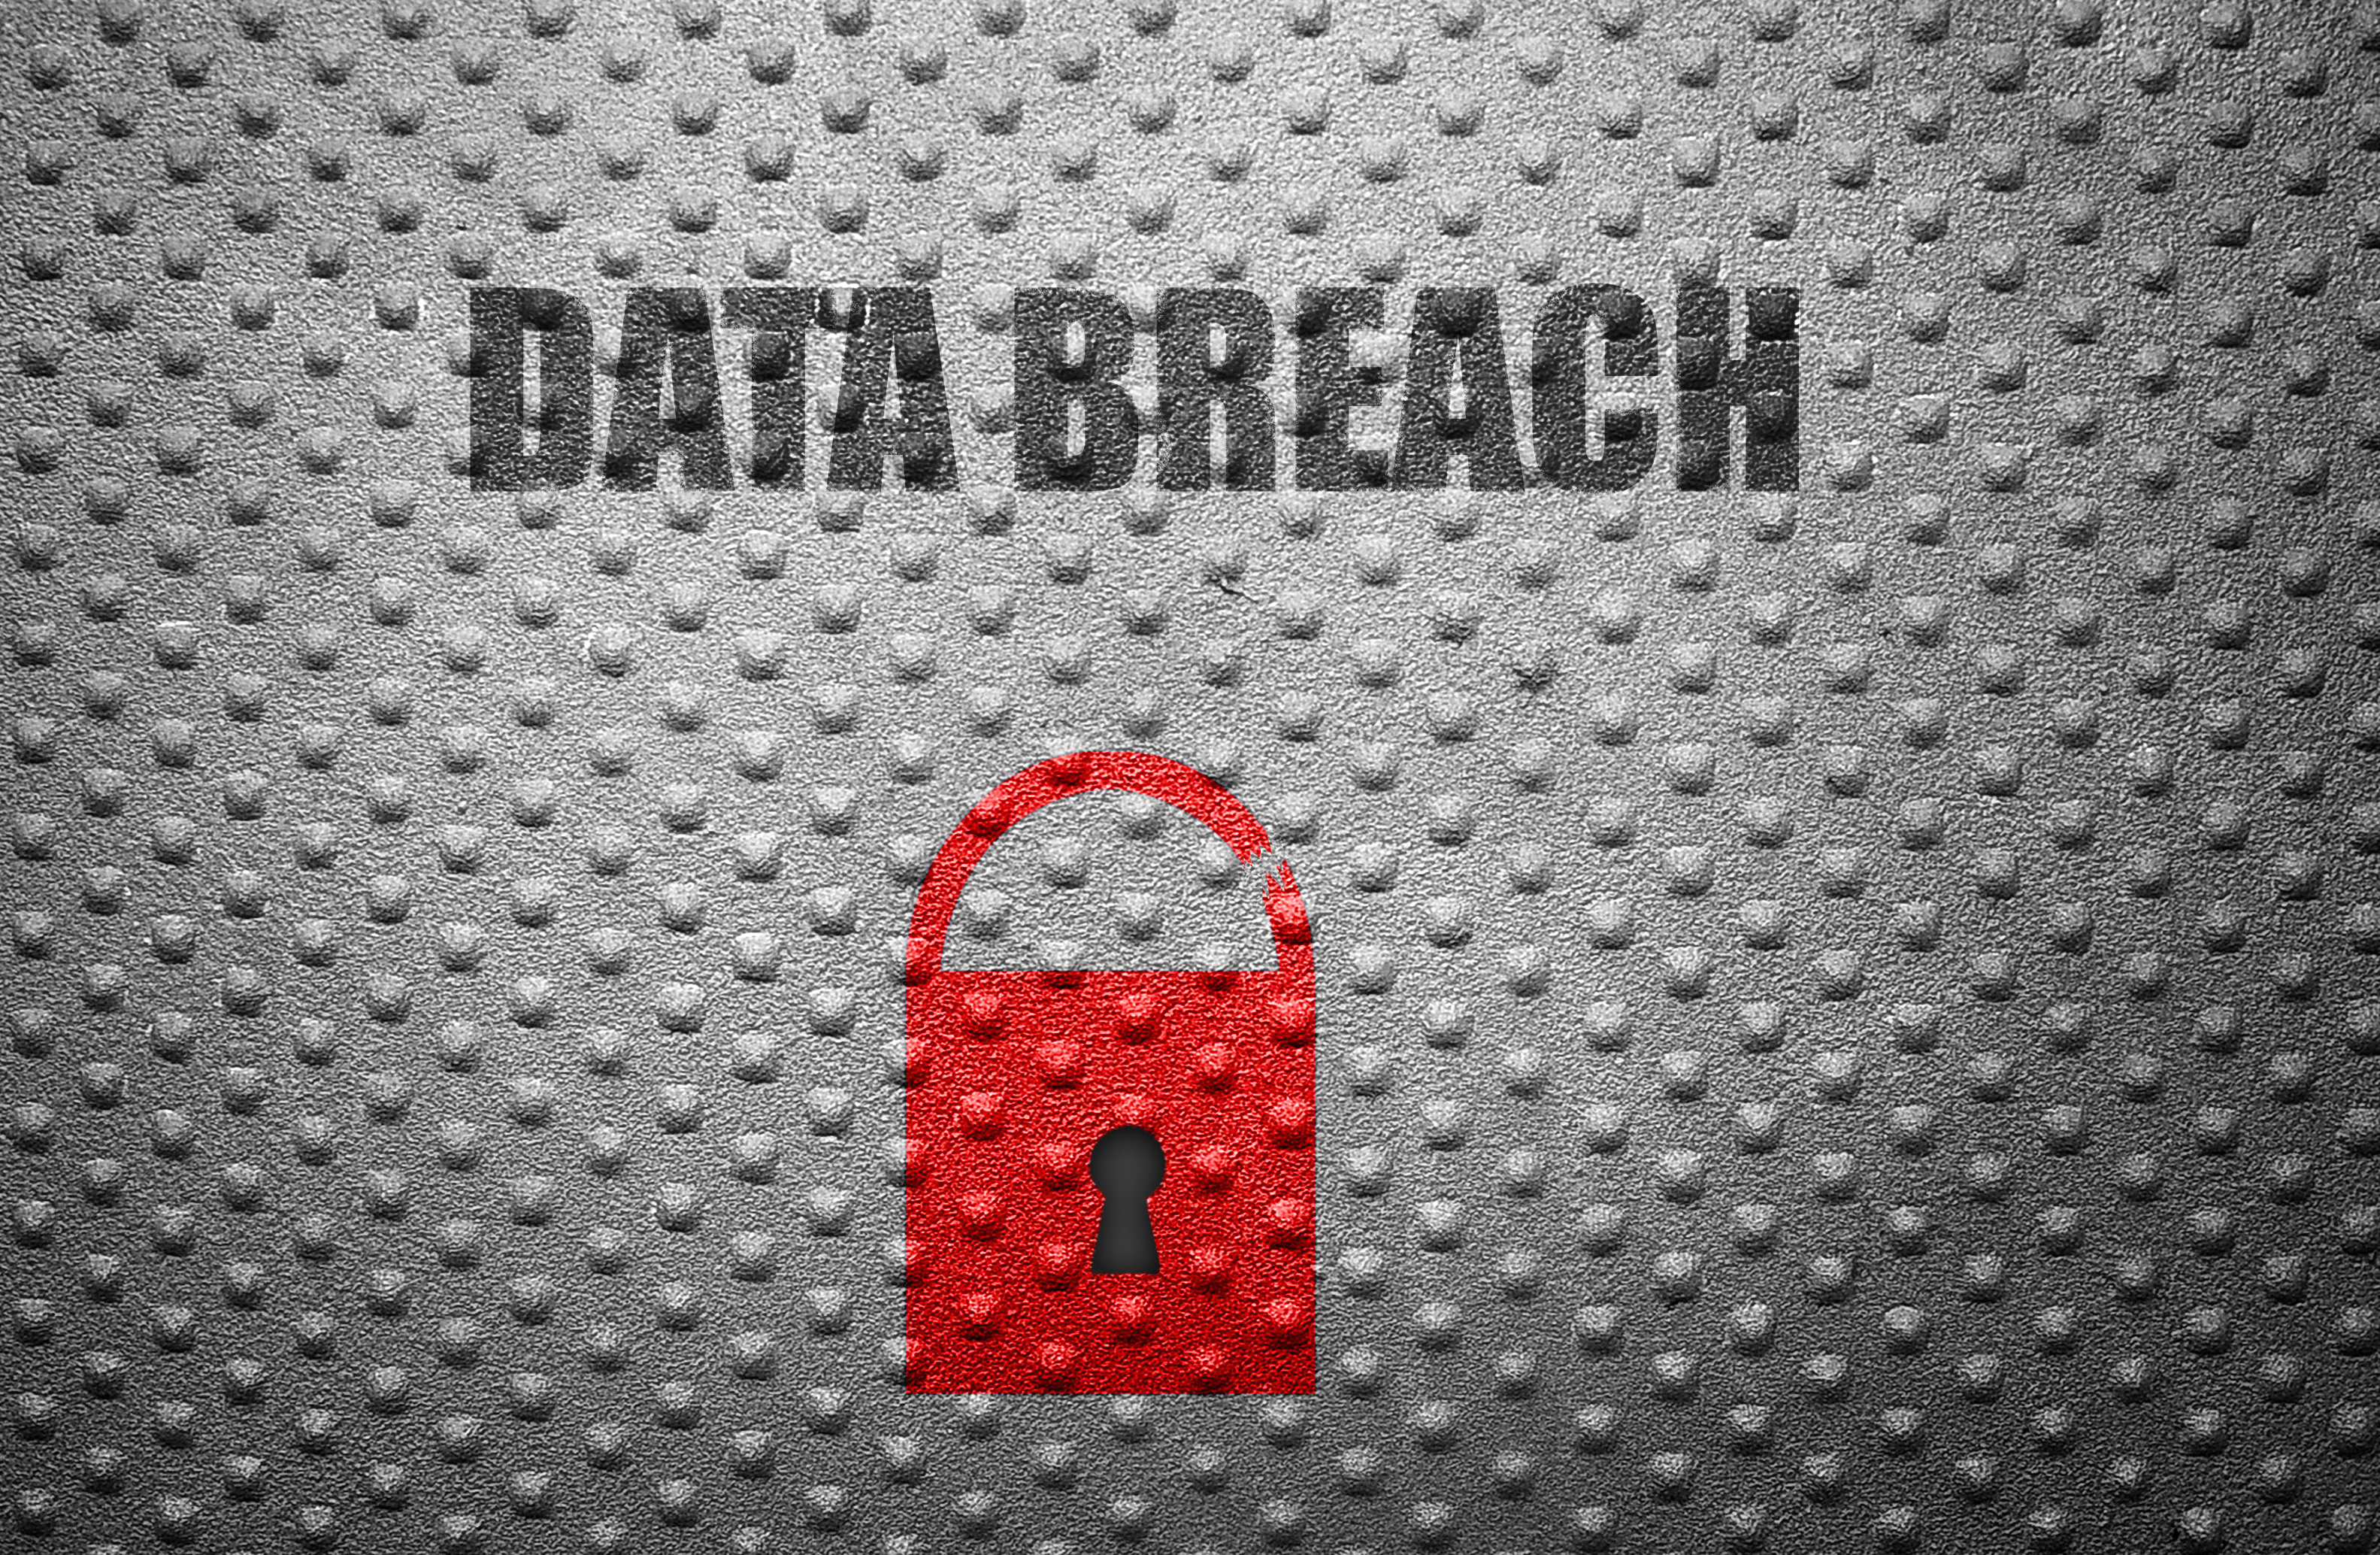 Global survey shows consumers are abandoning brands after data breaches